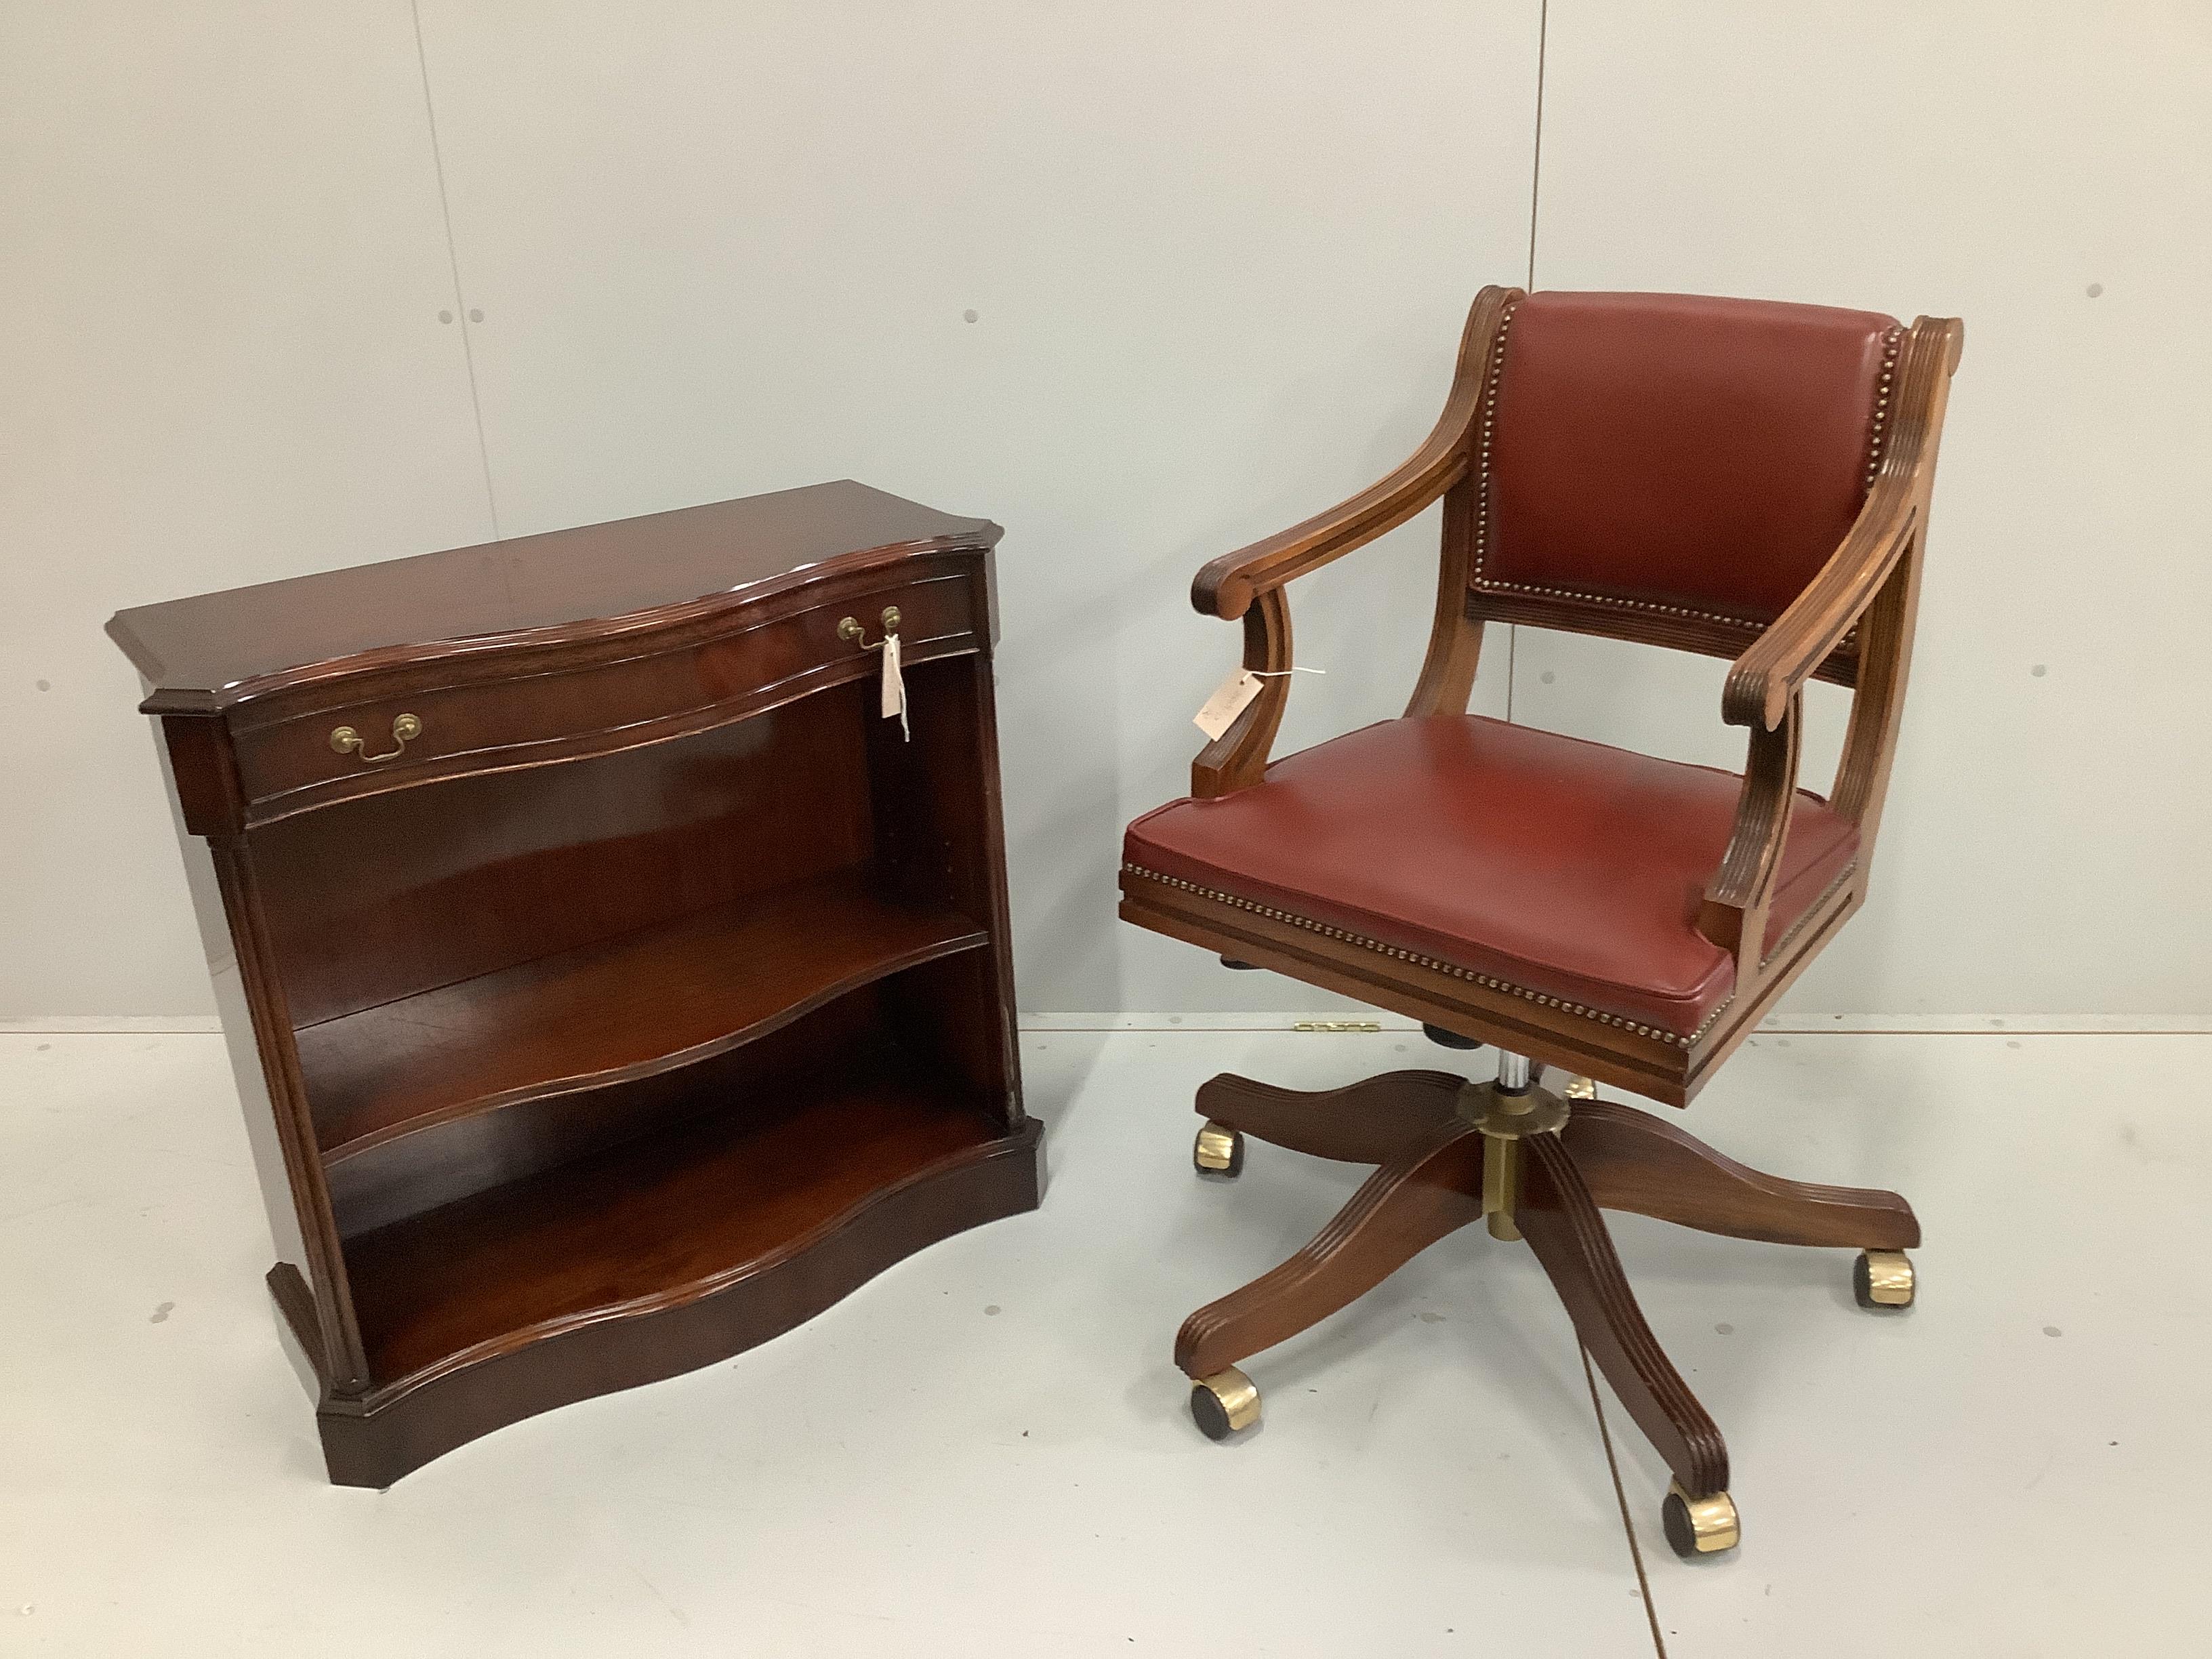 A reproduction mahogany framed swivel desk armchair, upholstered in red leather, width 54cm, height 95cm together with a small reproduction mahogany serpentine open bookcase, width 79cm, height 77cm